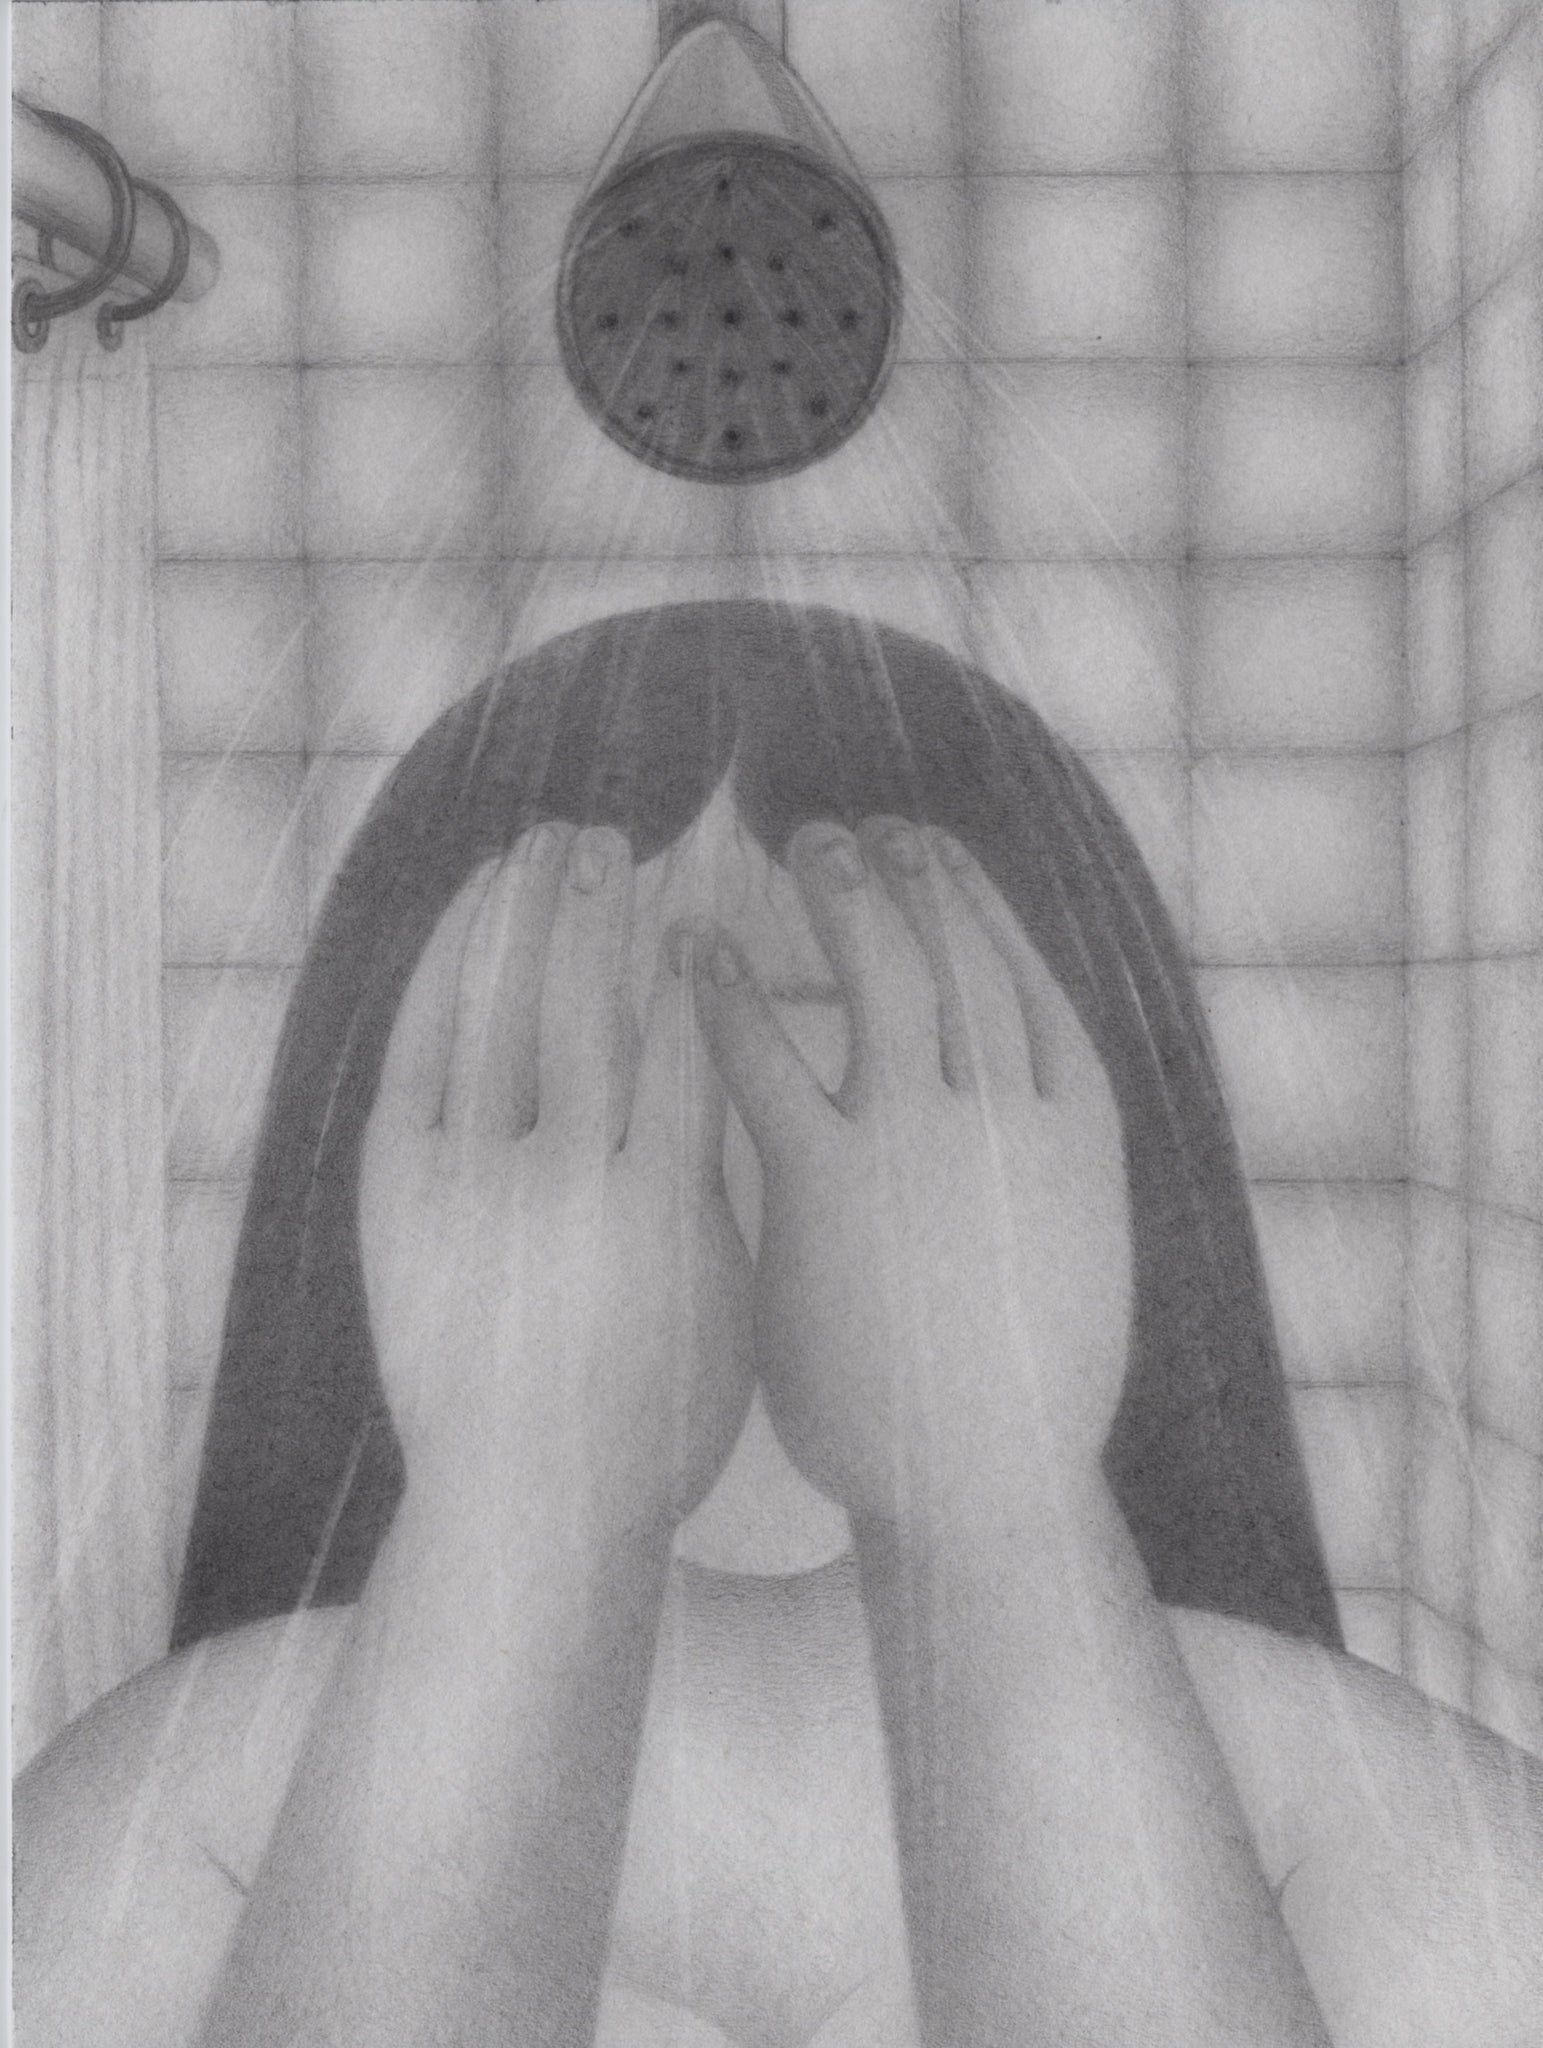 Opal Ong, "Showering Without a Solvable Absence" SOLD